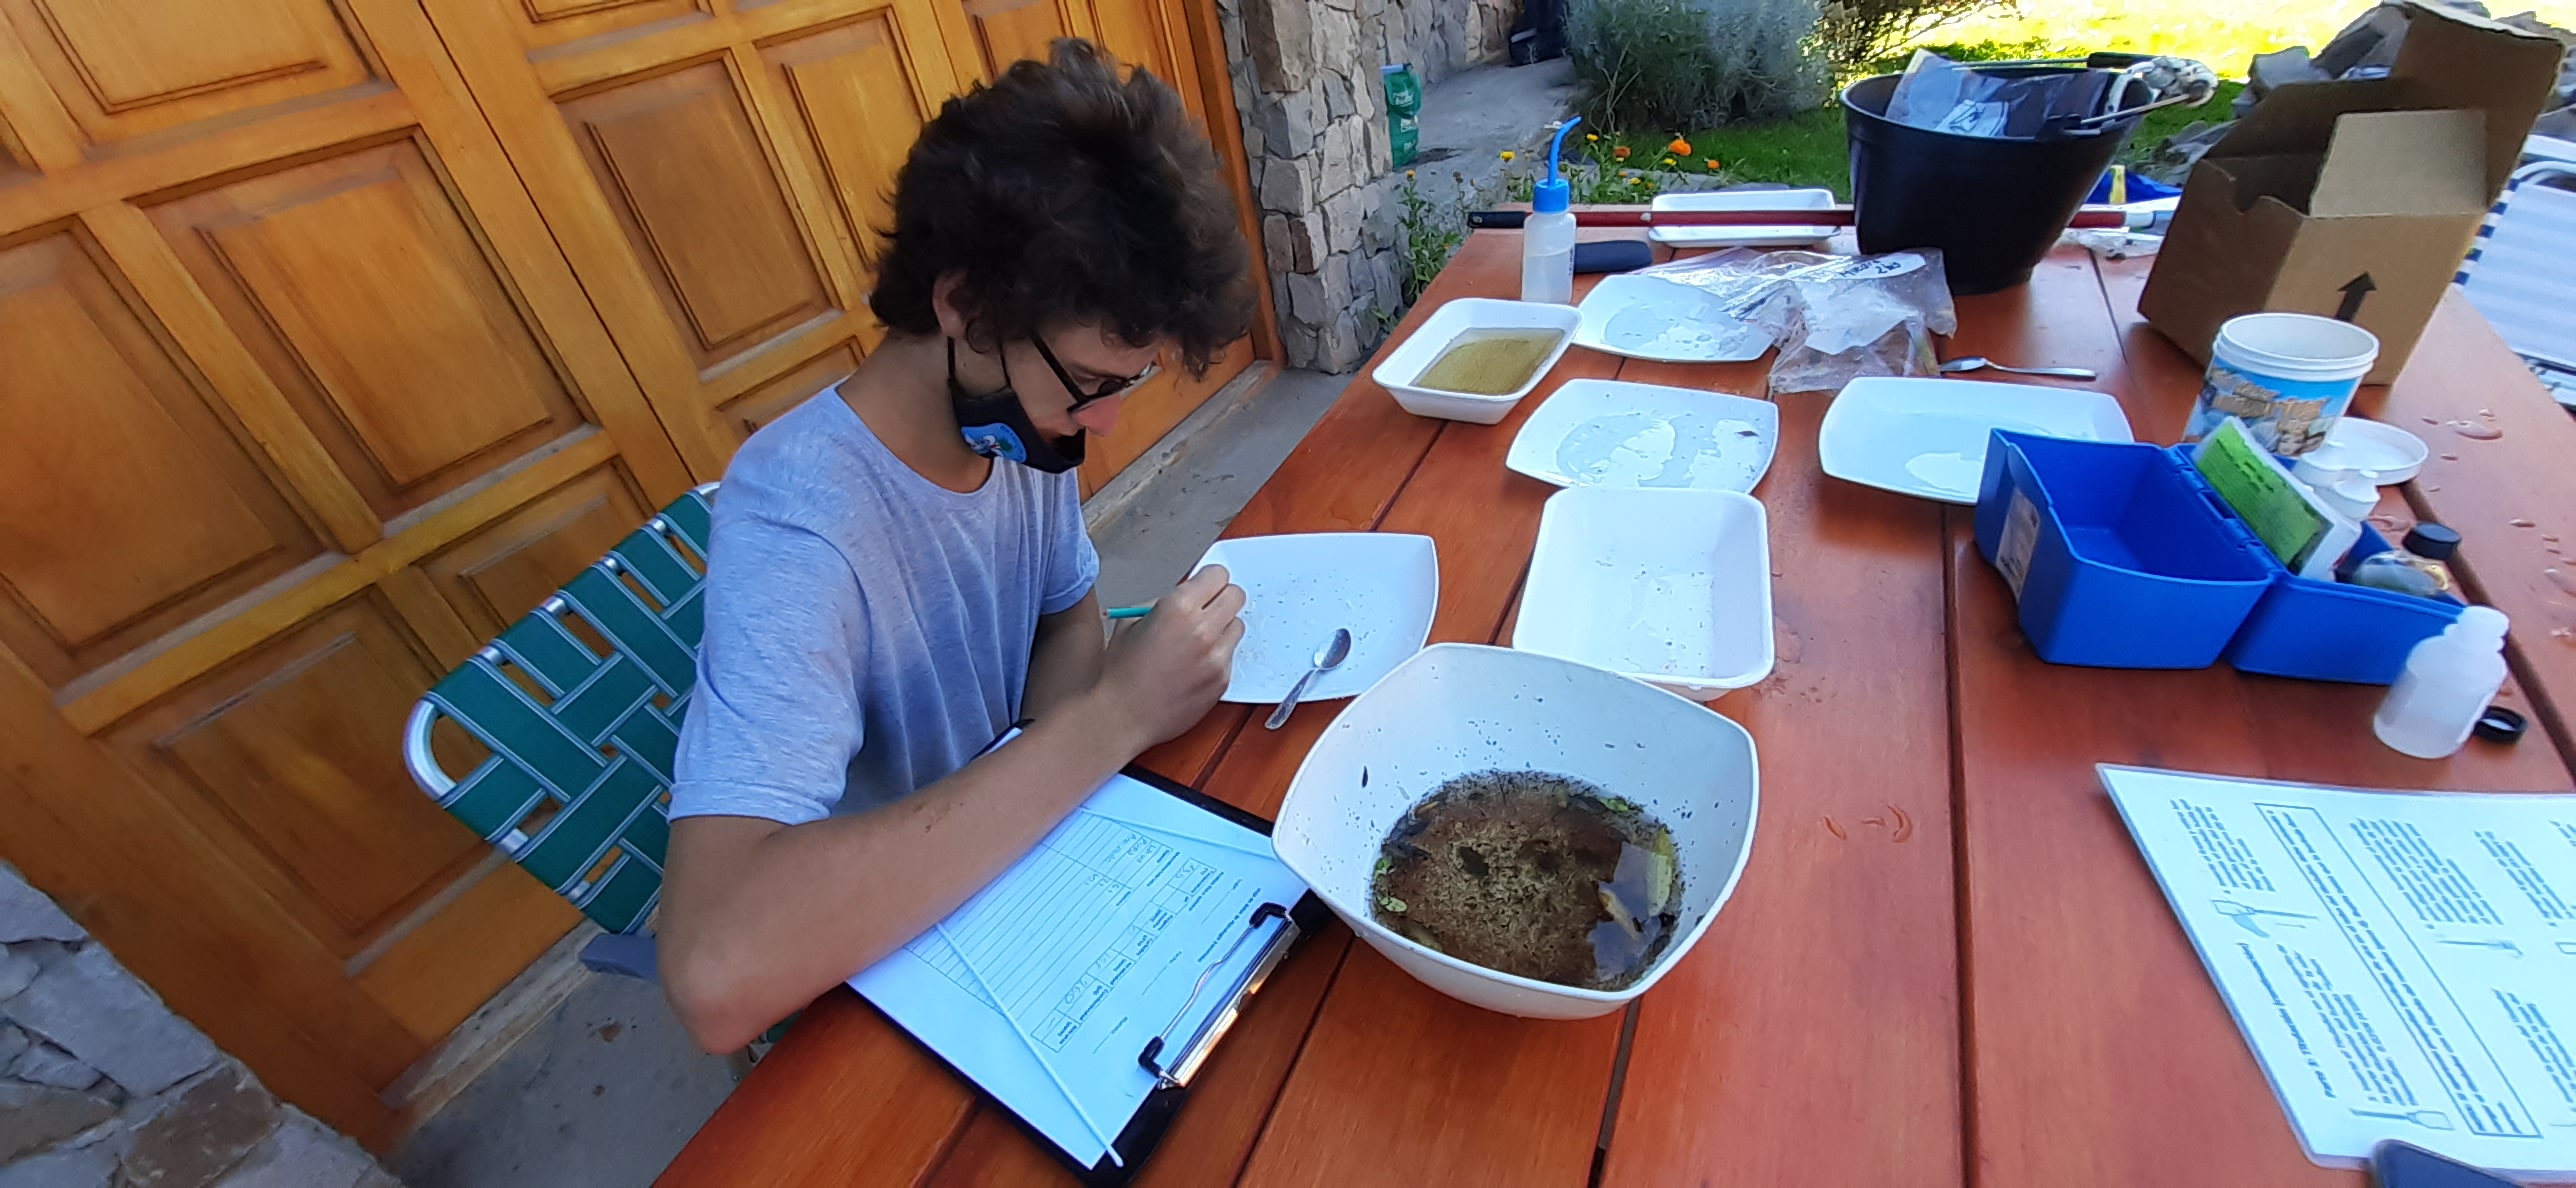 Photo of Juan working at an outdoor table